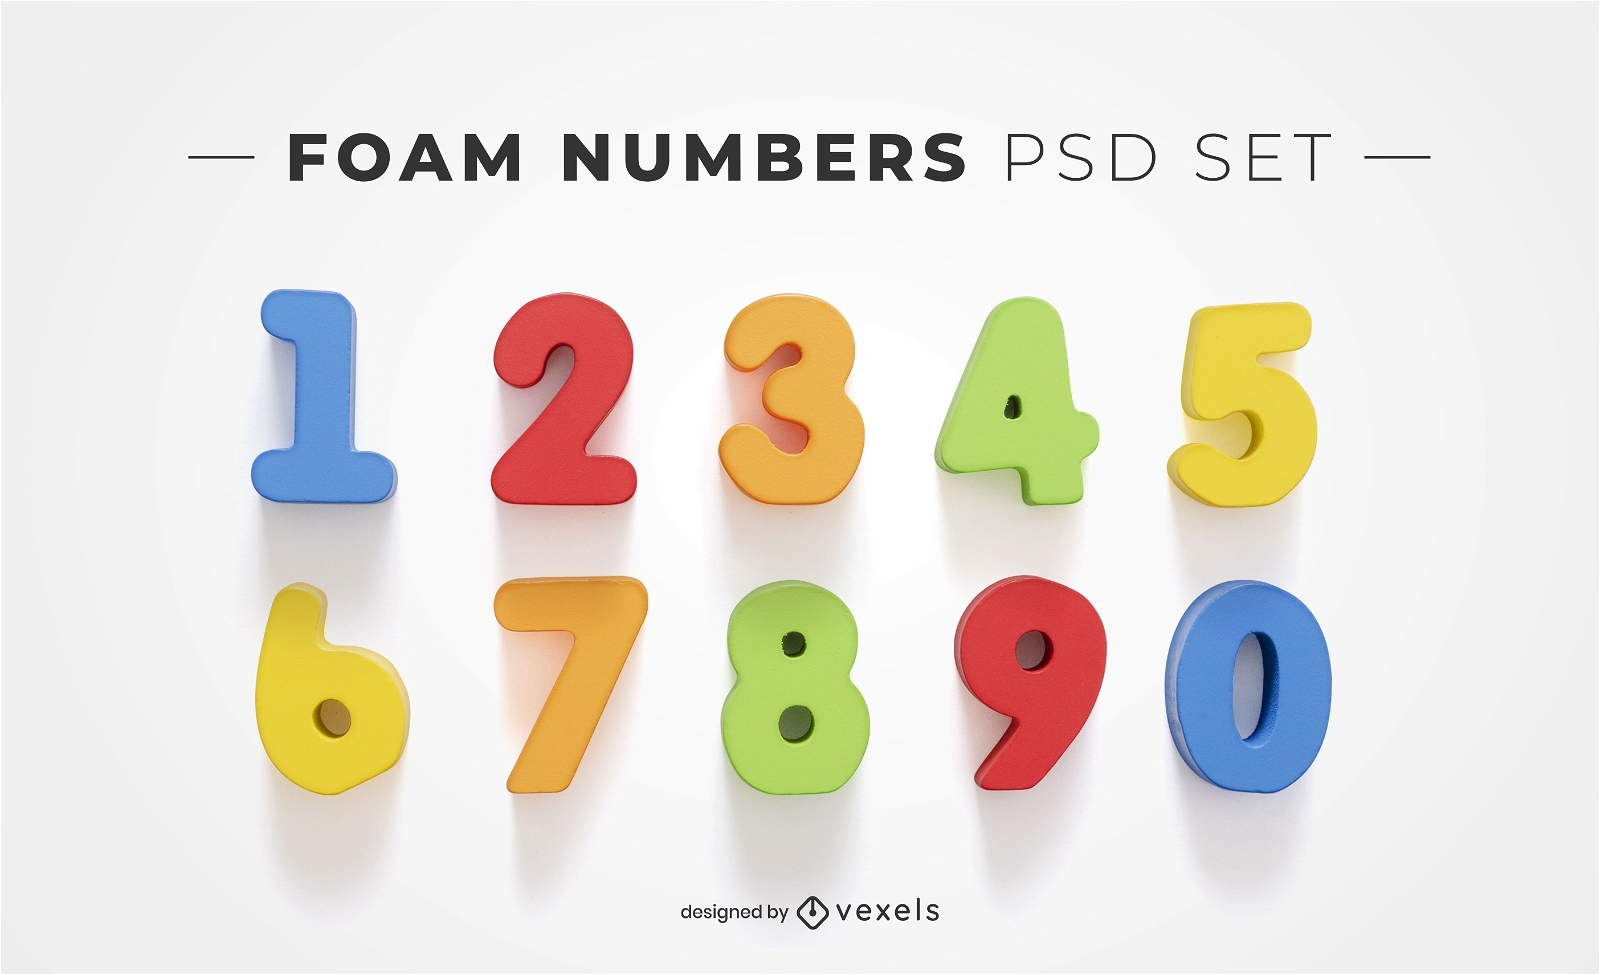 Foam Numbers Psd Elements For Mockups PSD Editable Template